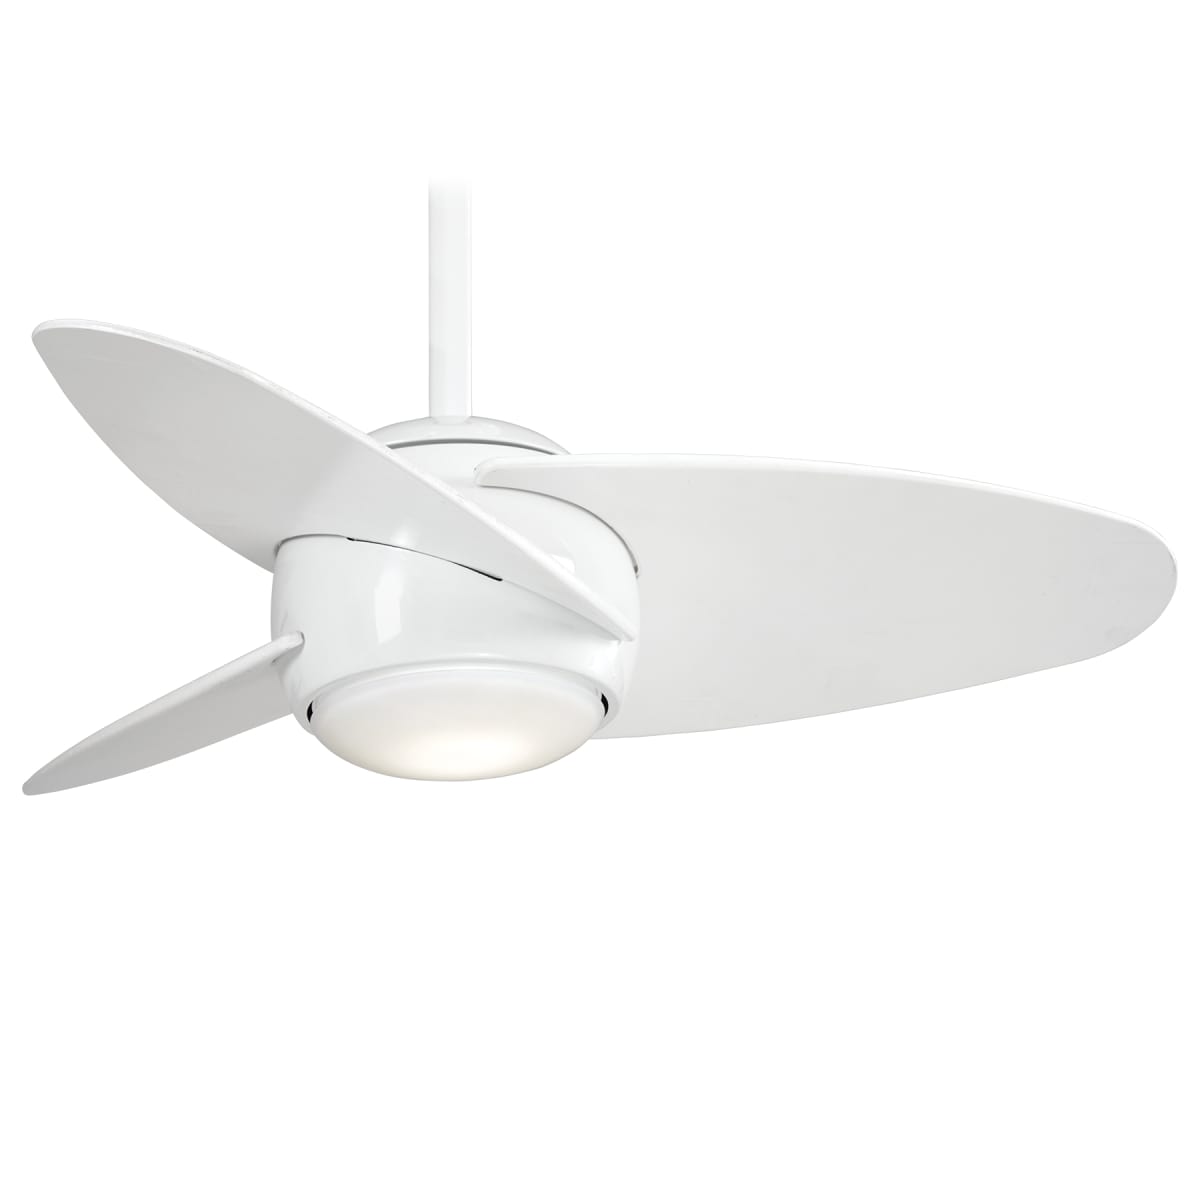 Minkaaire F410l Wh White Slant 36 3 Blade Indoor Led Ceiling Fan